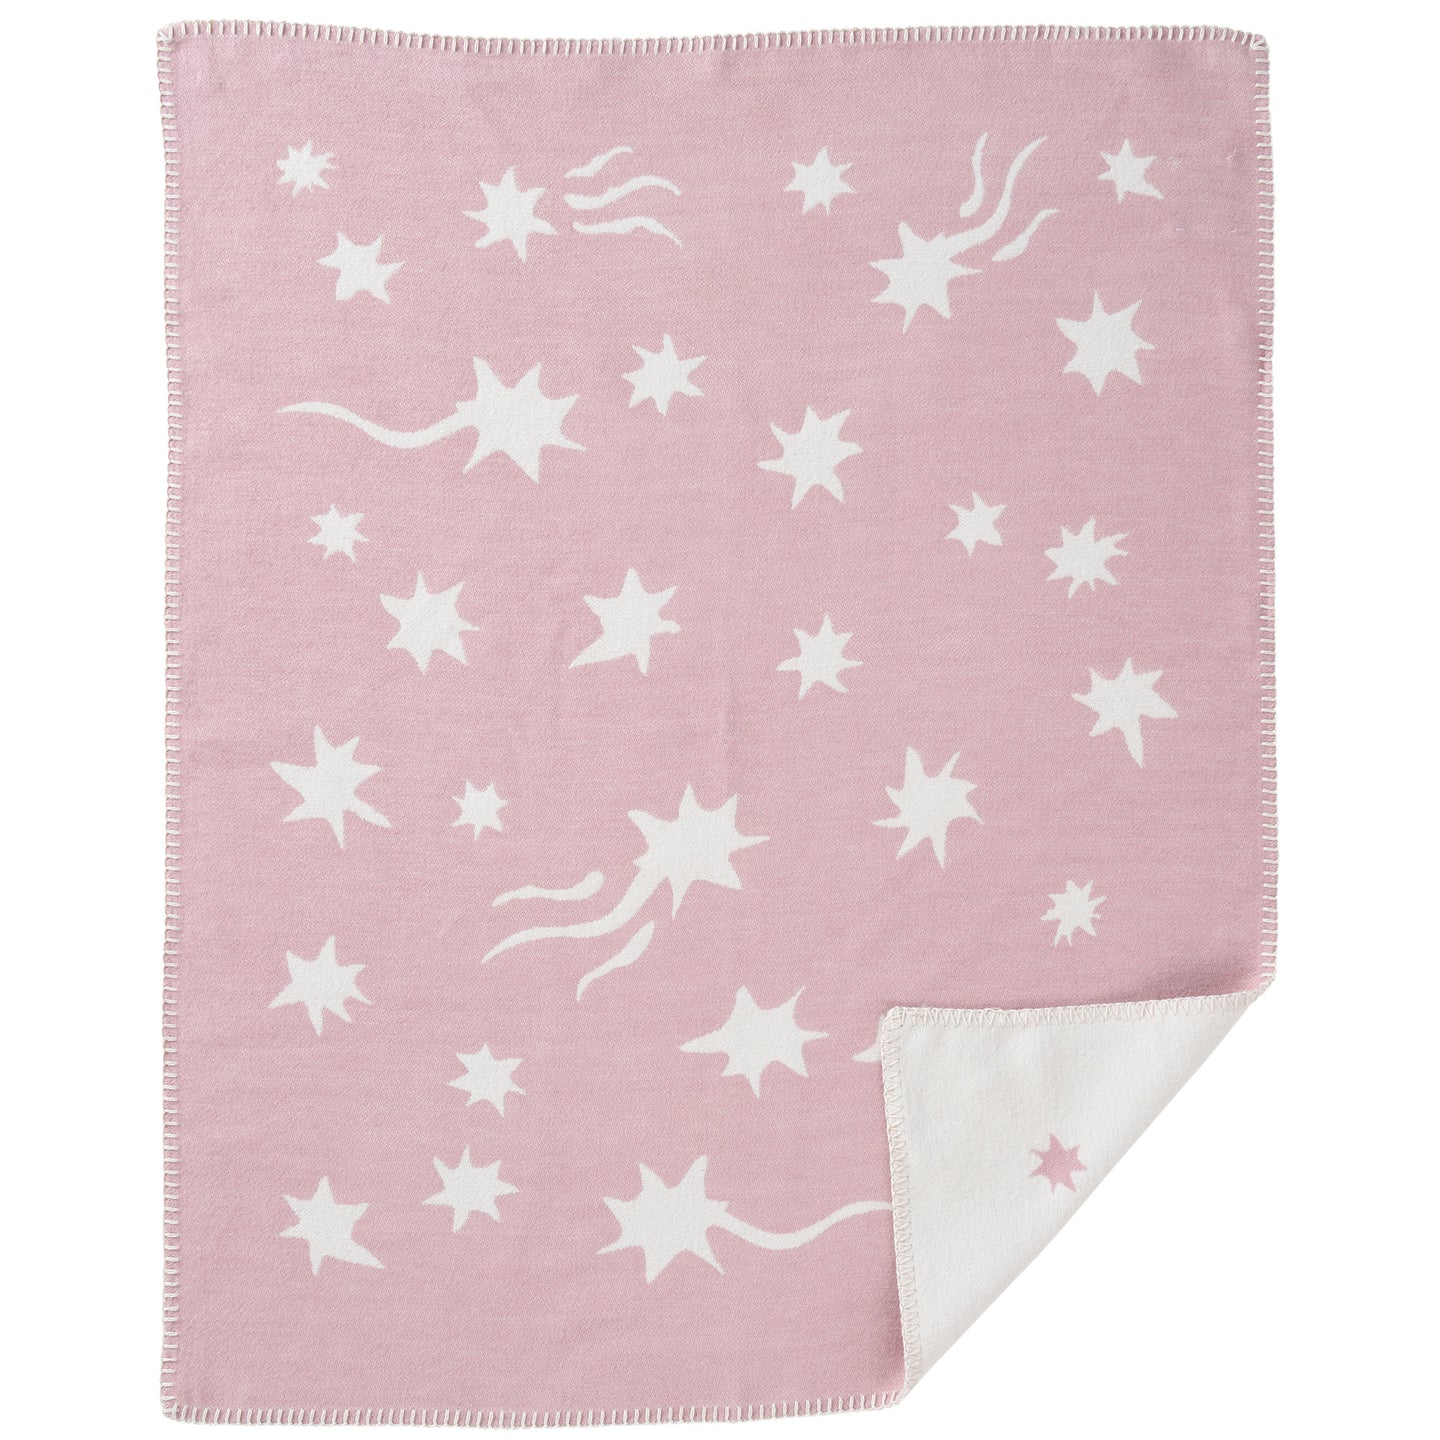 Shooting Star Dusty Pink Brushed Organic Cotton Blanket 70x90cm